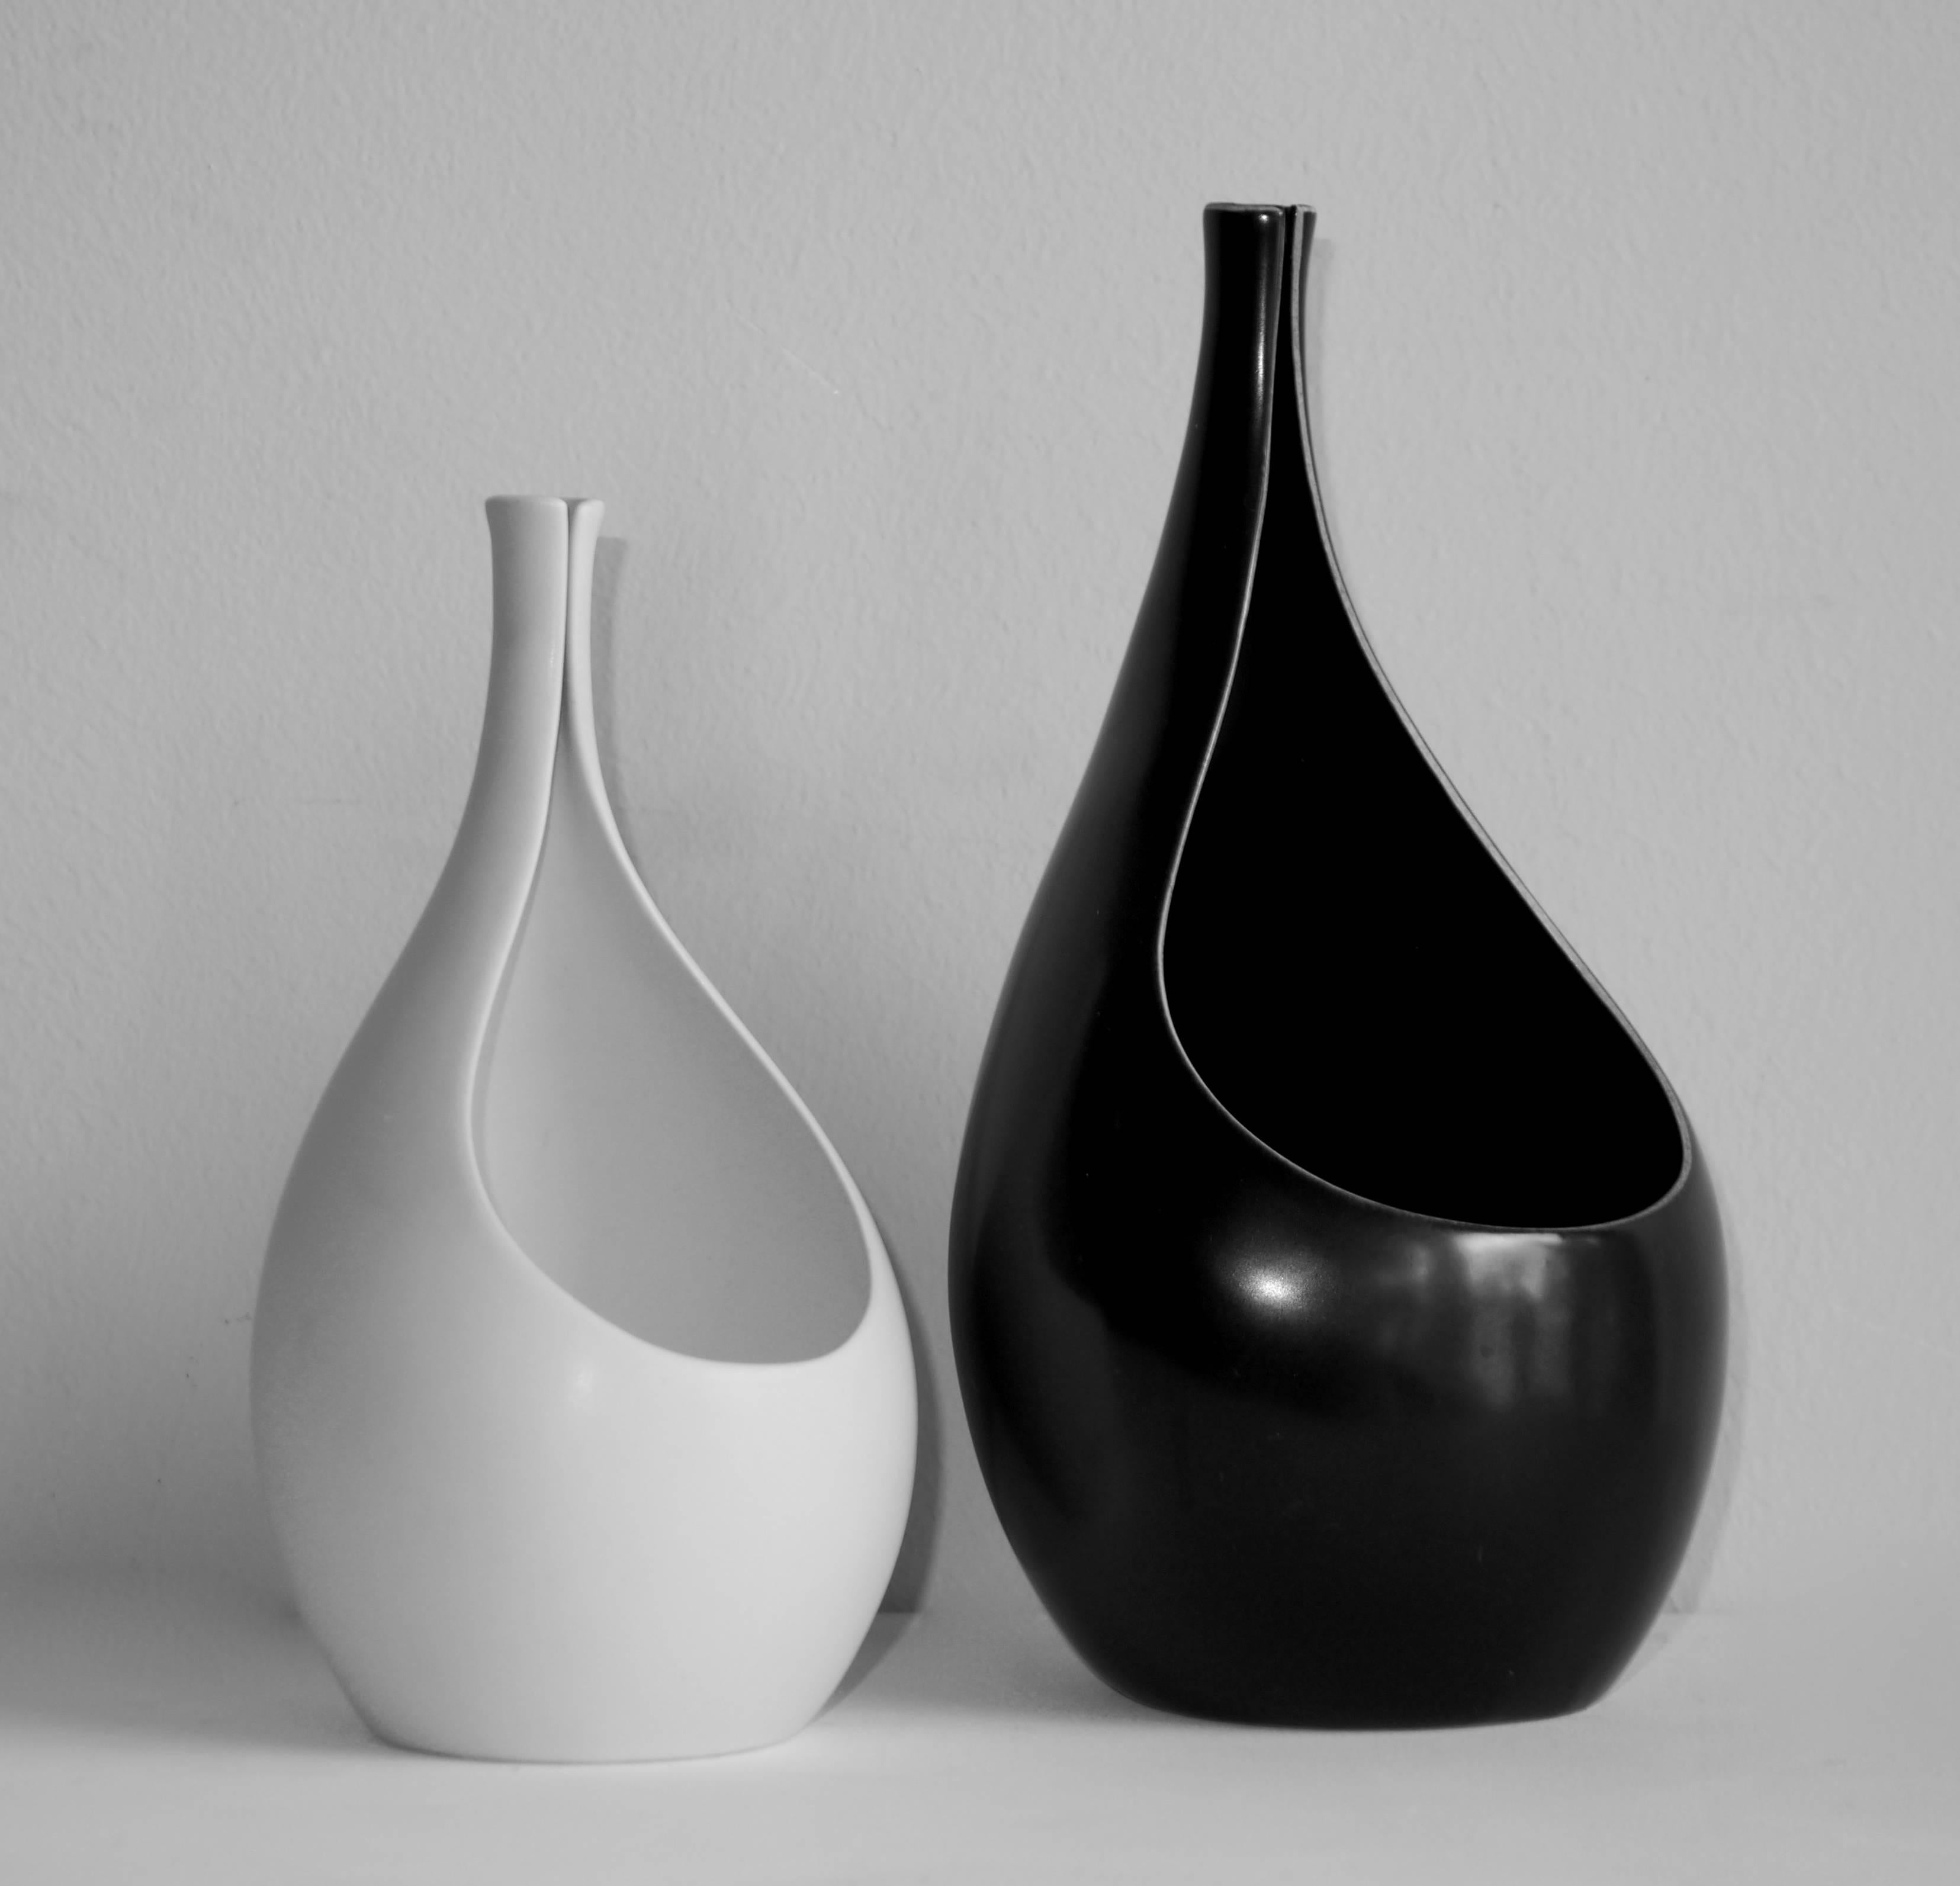 Two 1953 black and white ceramic vases of the 